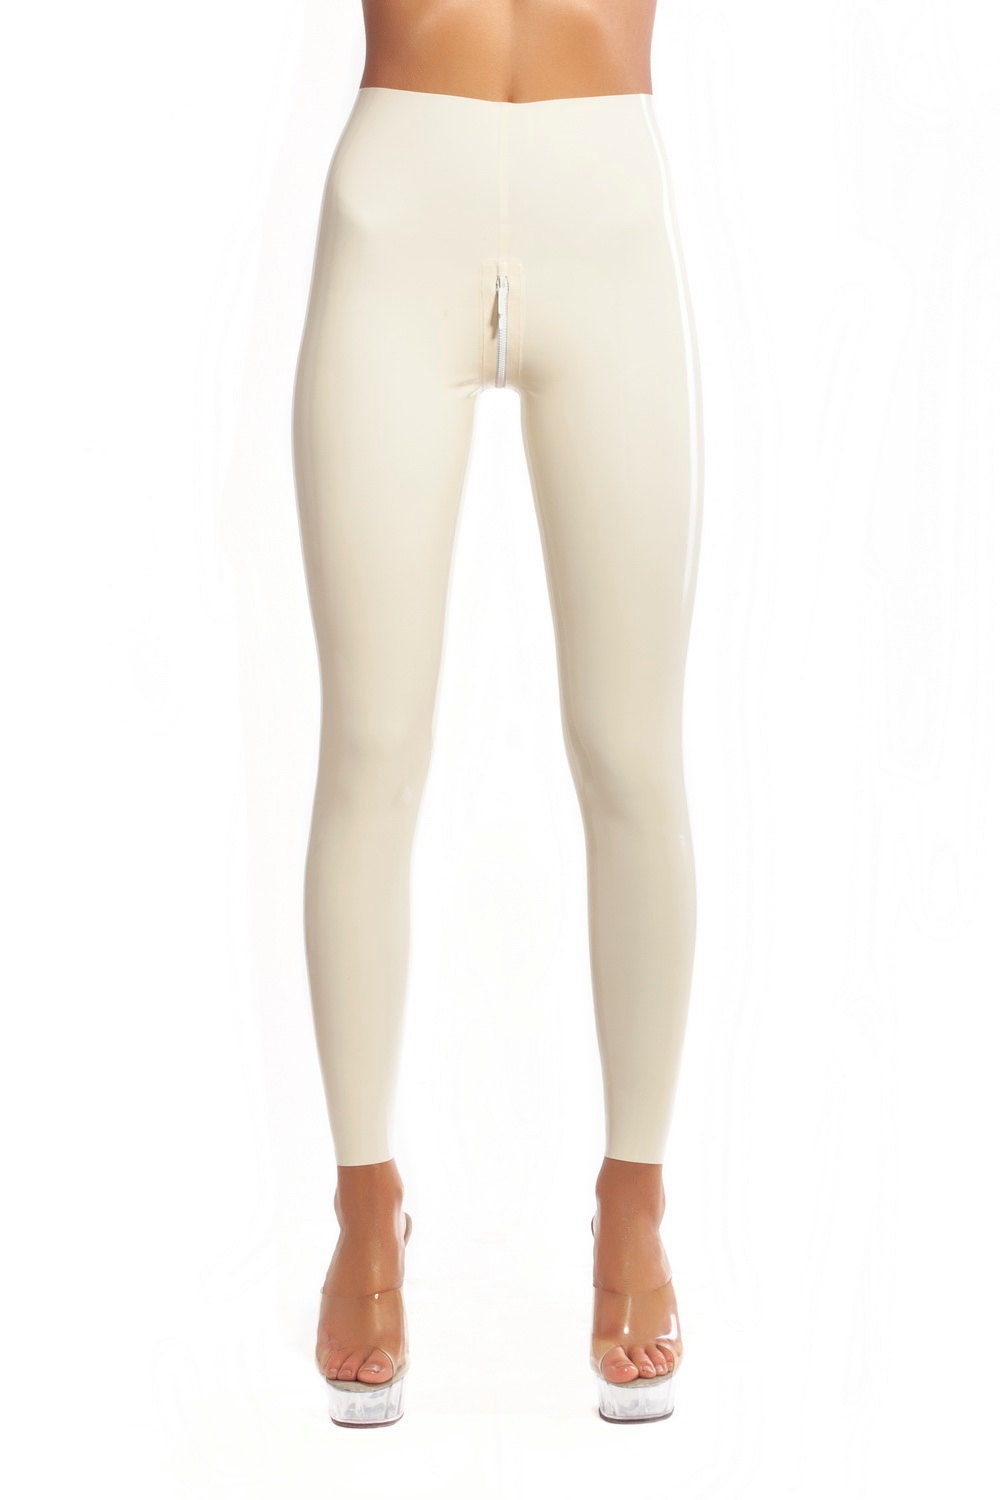 White Latex Leggings With Double Slider Crotch Zipper 